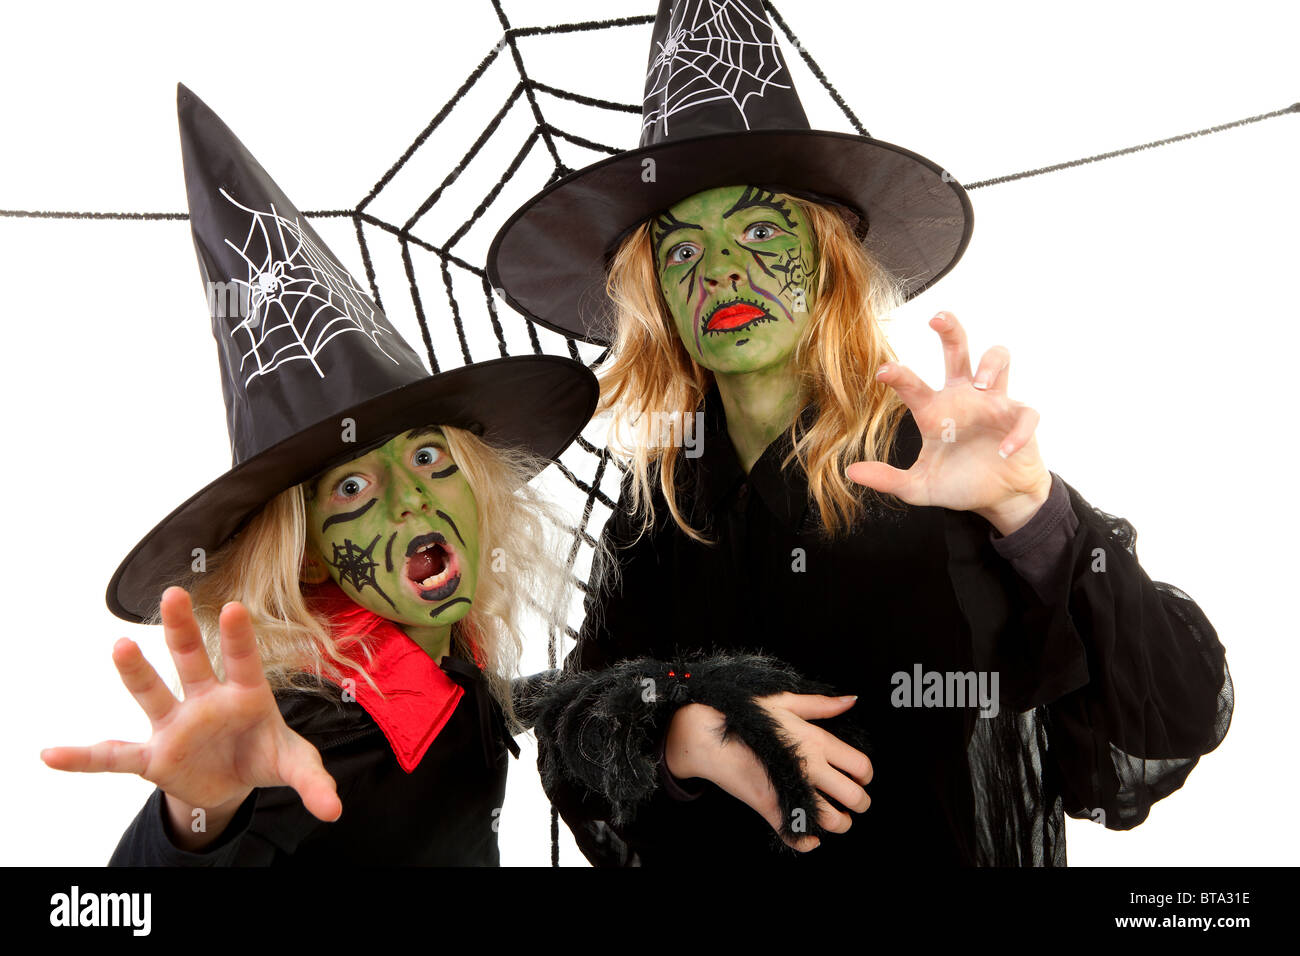 Scary green witches for Halloween with spiderweb over white background Stock Photo